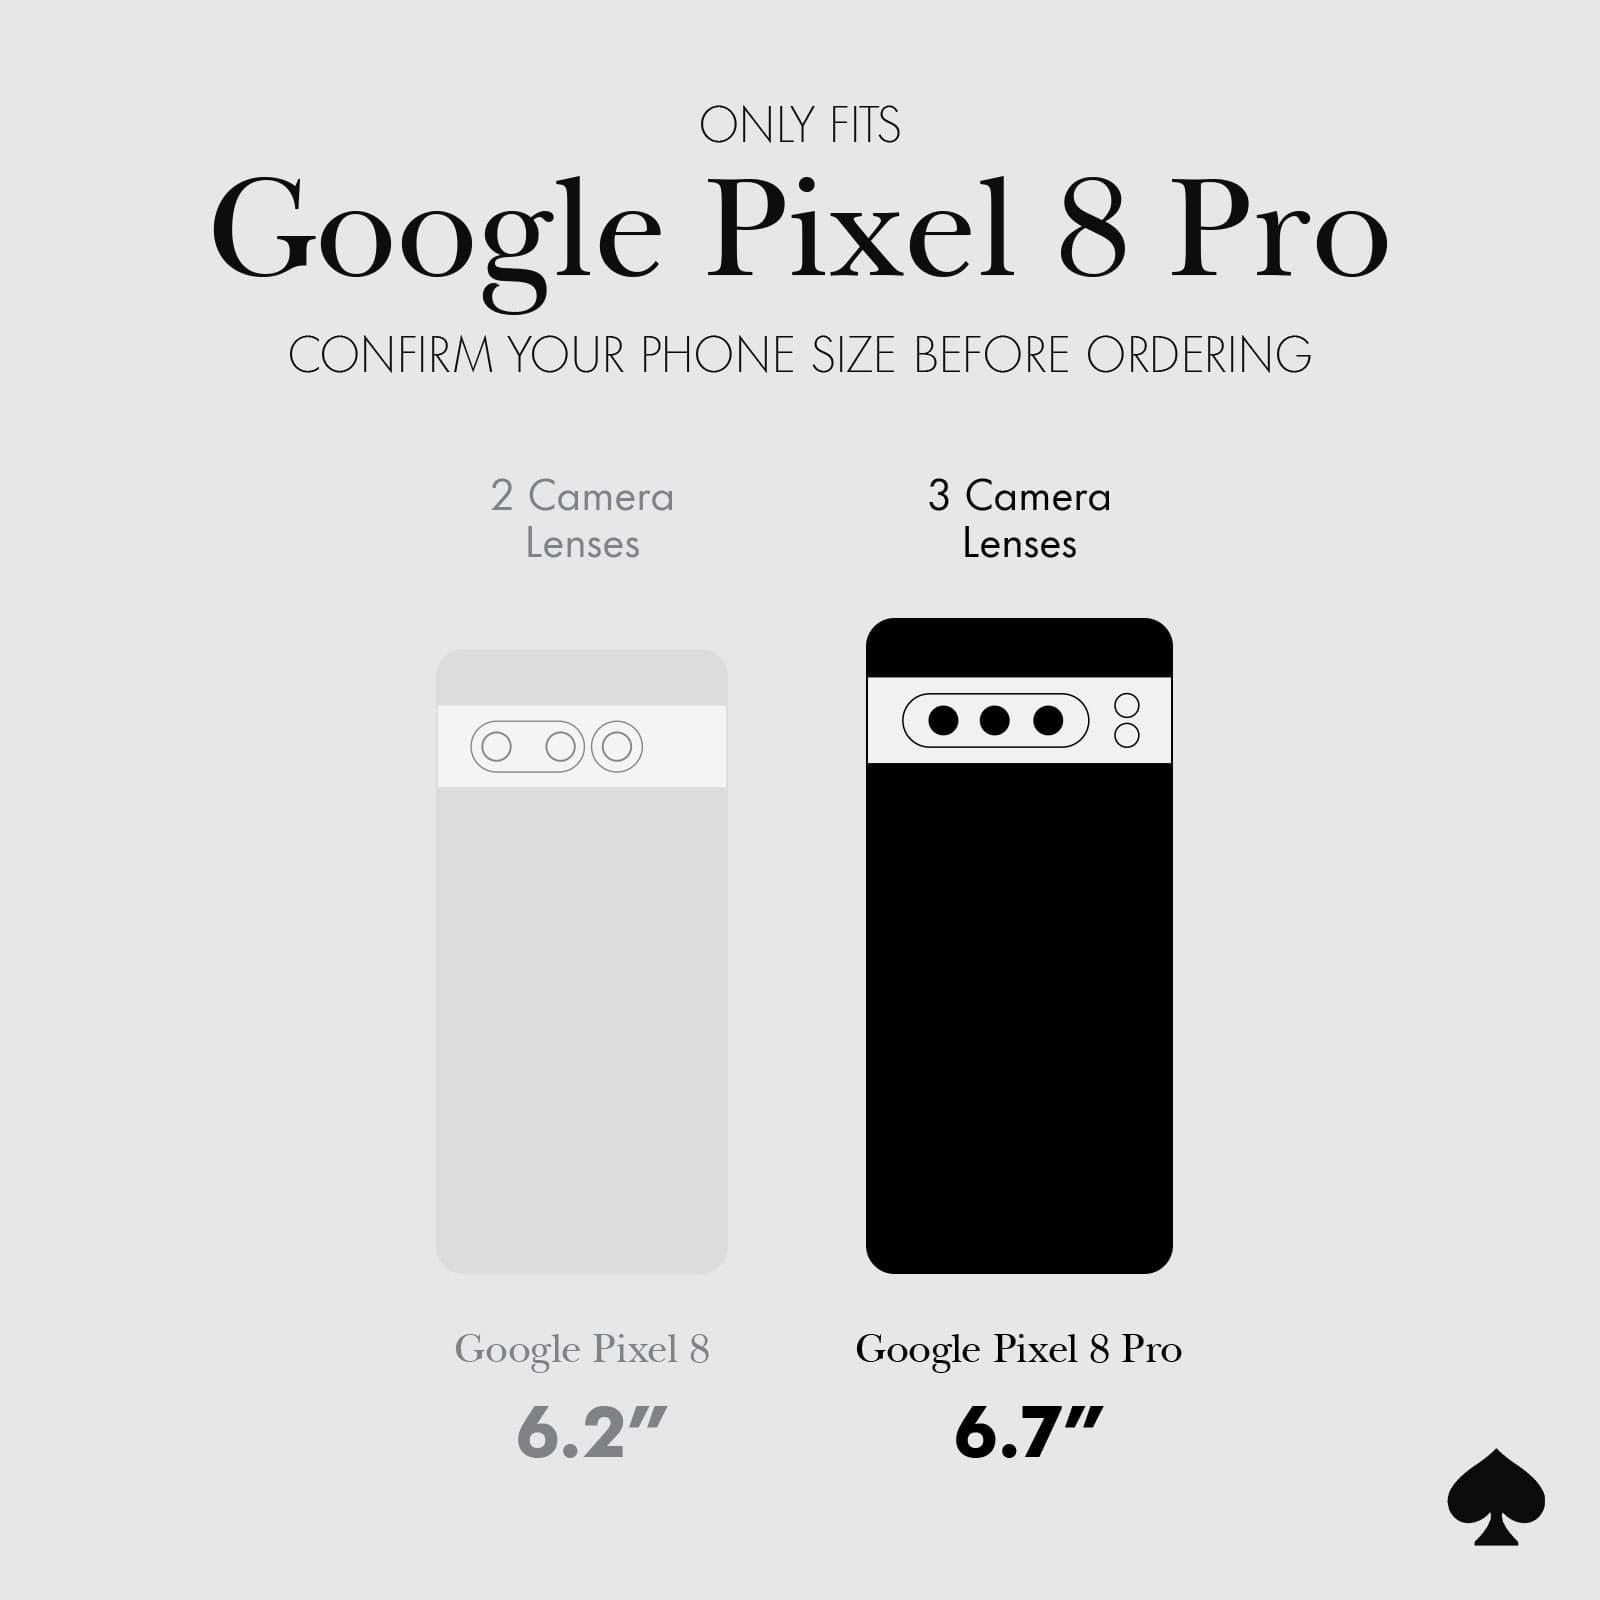 ONLY FITS PIXEL 8 PRO. CONFIRM YOUR PHONE SIZE BEFORE ORDERING